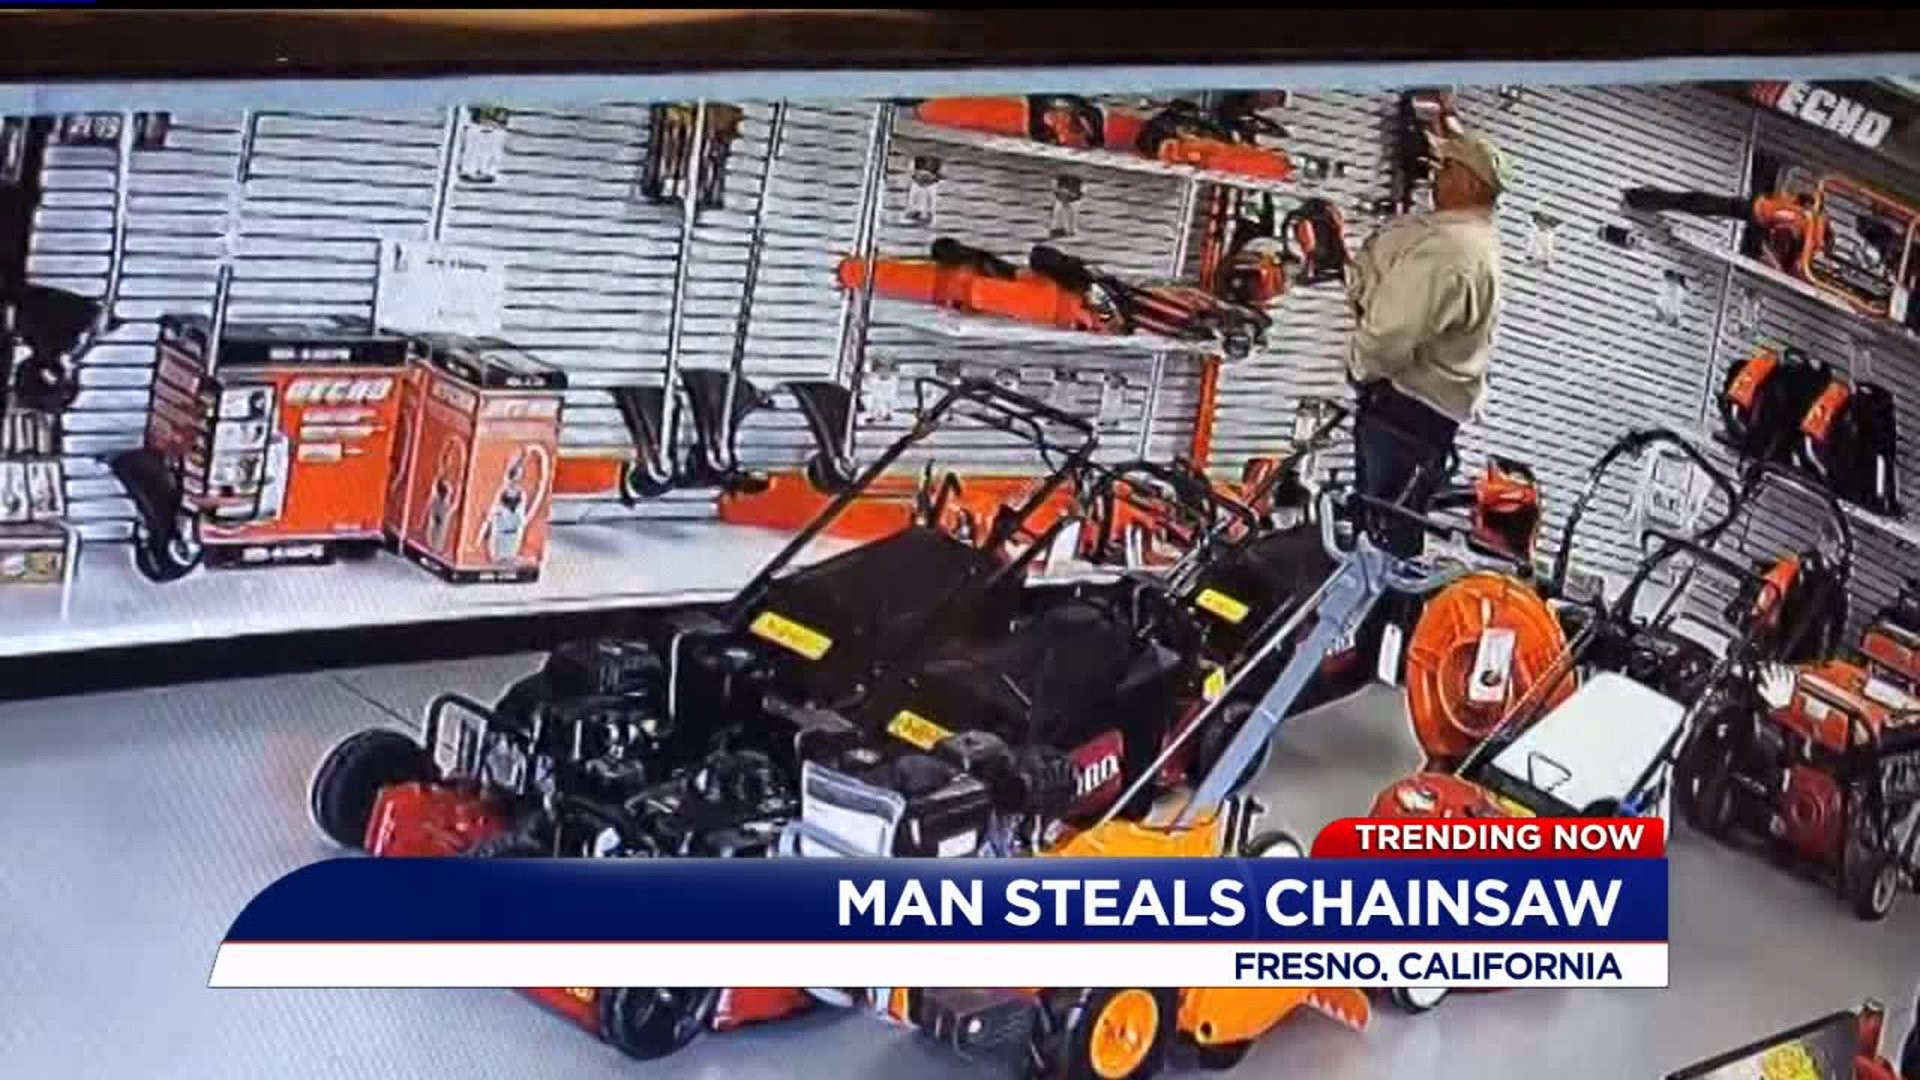 Man steals chainsaw by hiding it in his pants